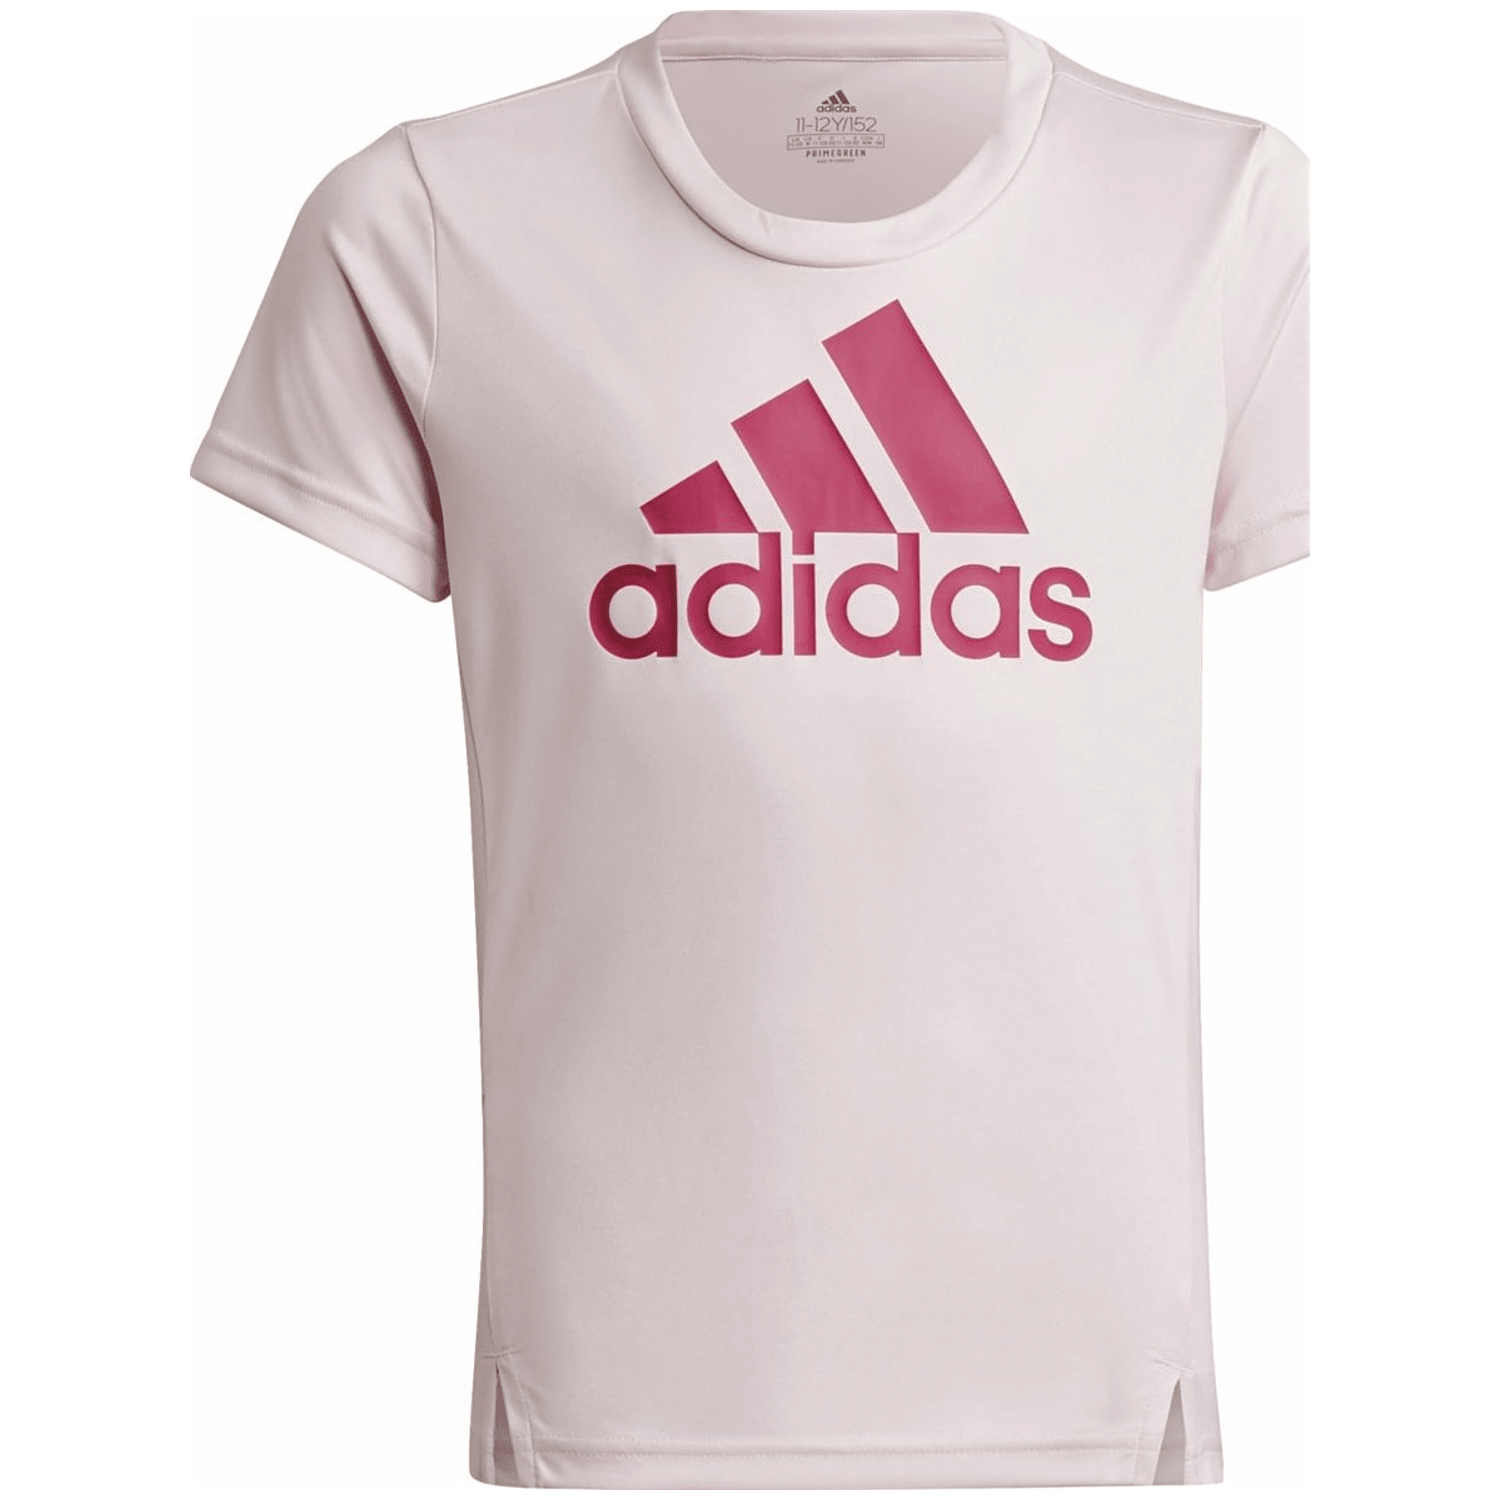 Adidas Designed To Move T-Shirt Mädchen